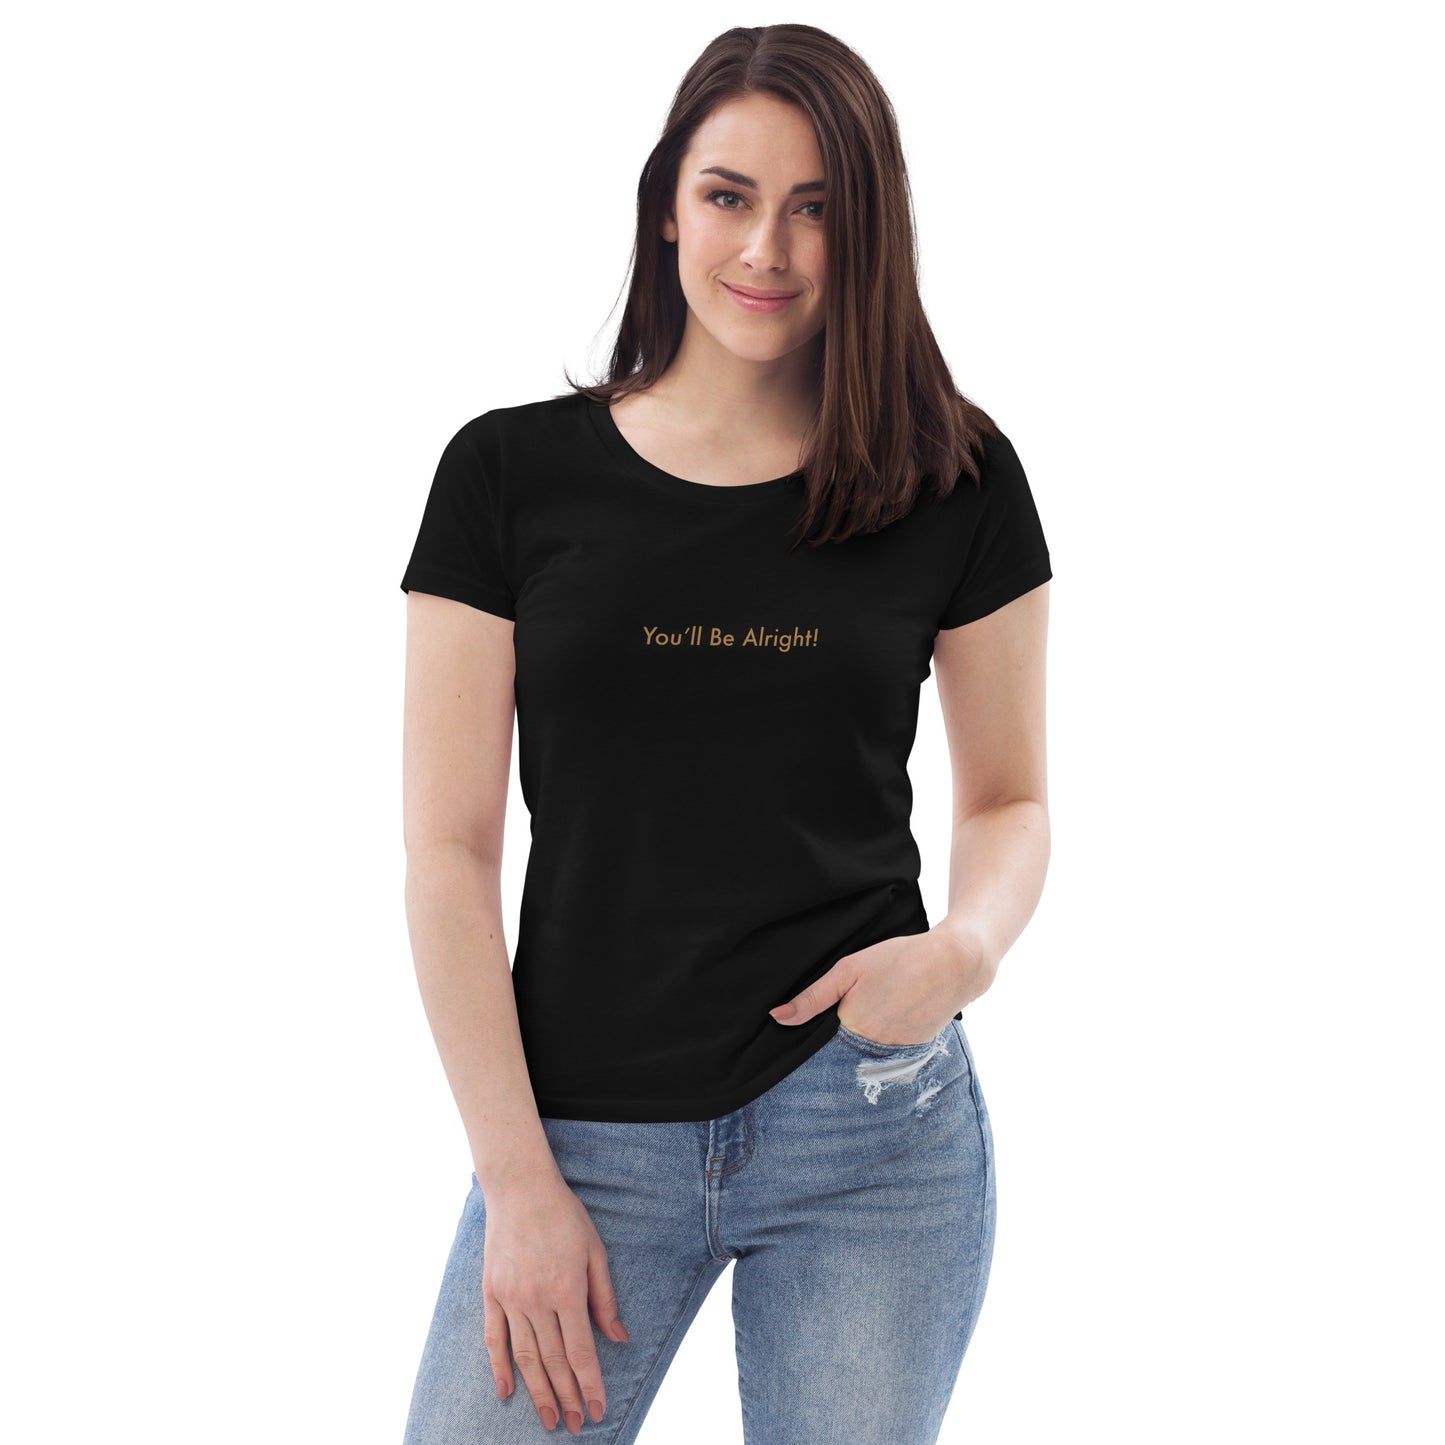 You'll Be Alright! Women's Fitted 100% Organic Cotton T-Shirt